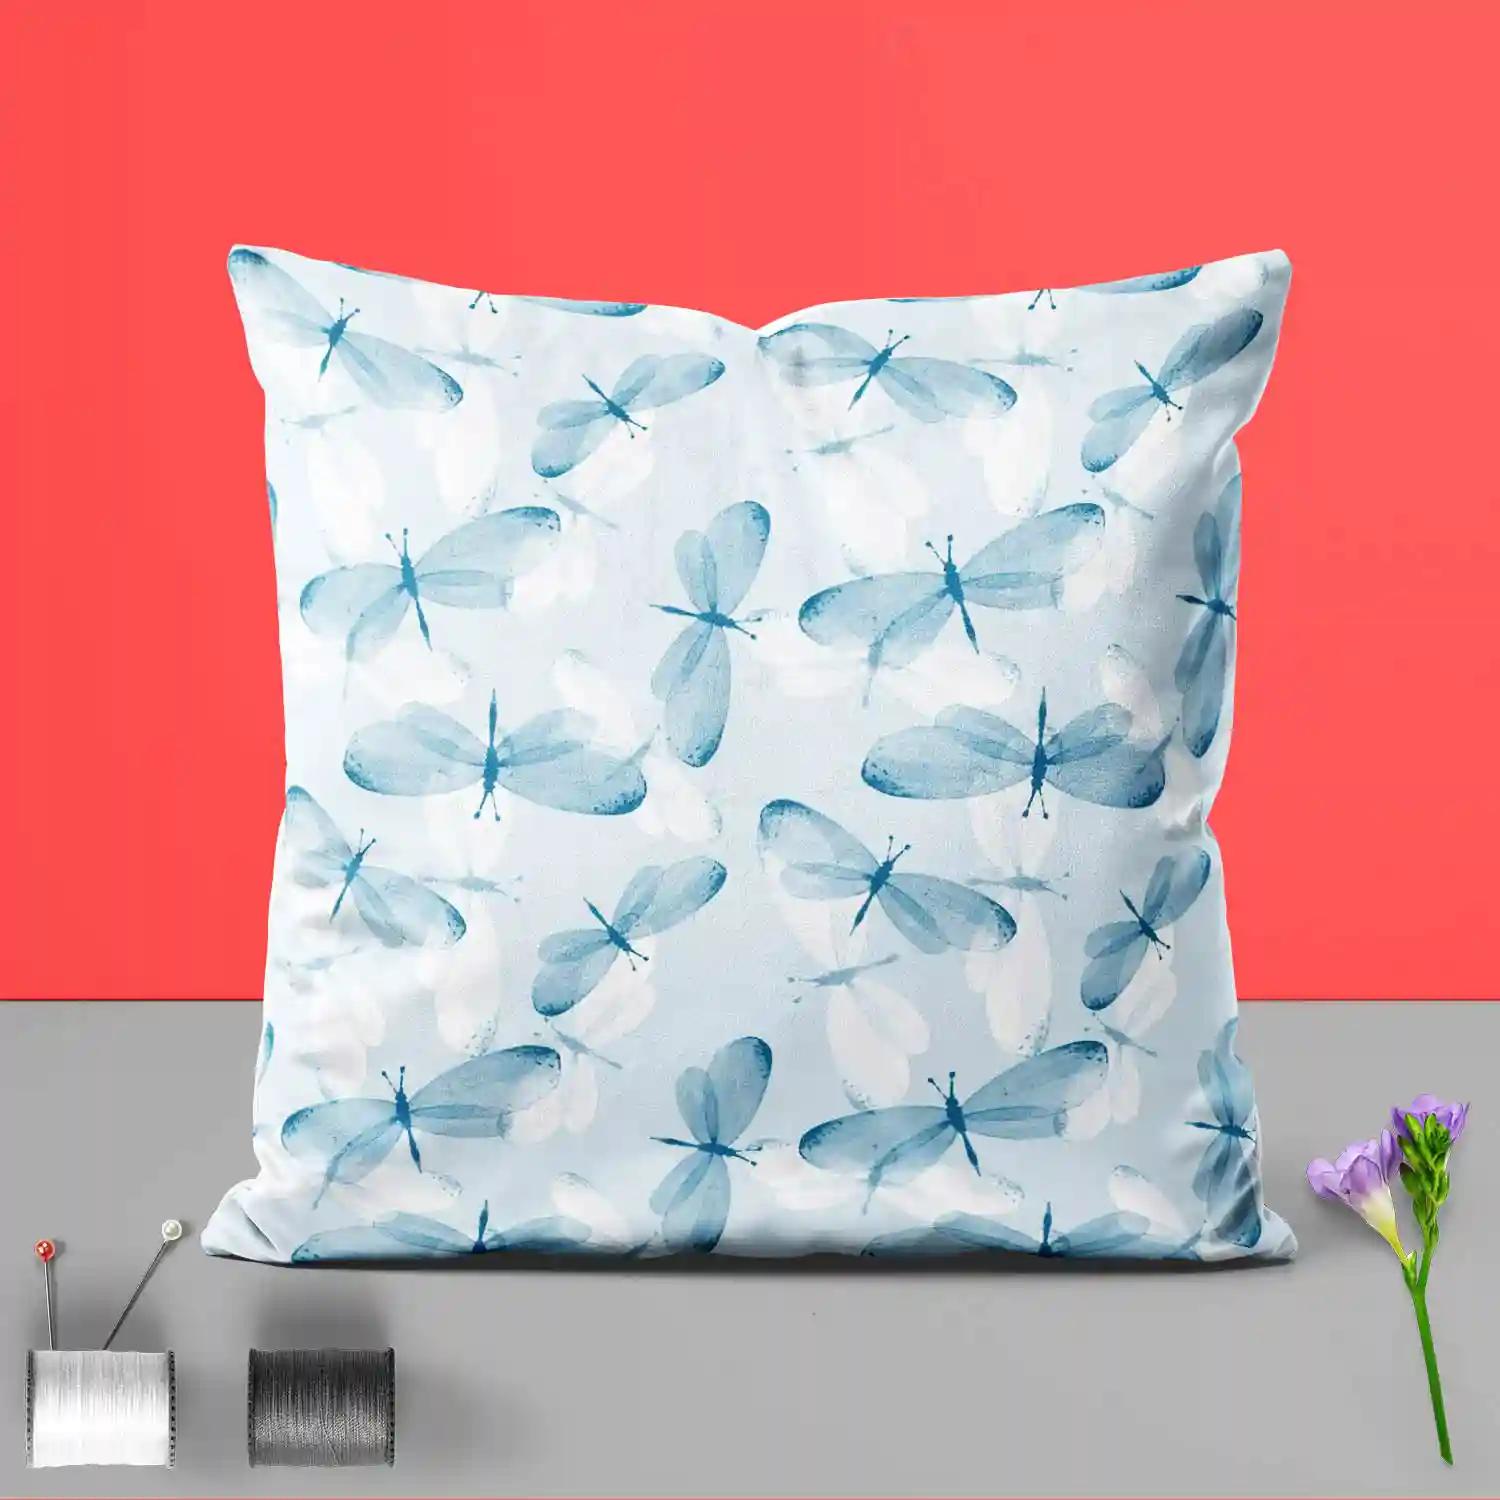 ArtzFolio Butterflies D2 | Decorative Cushion Cover for Bedroom & Living Room